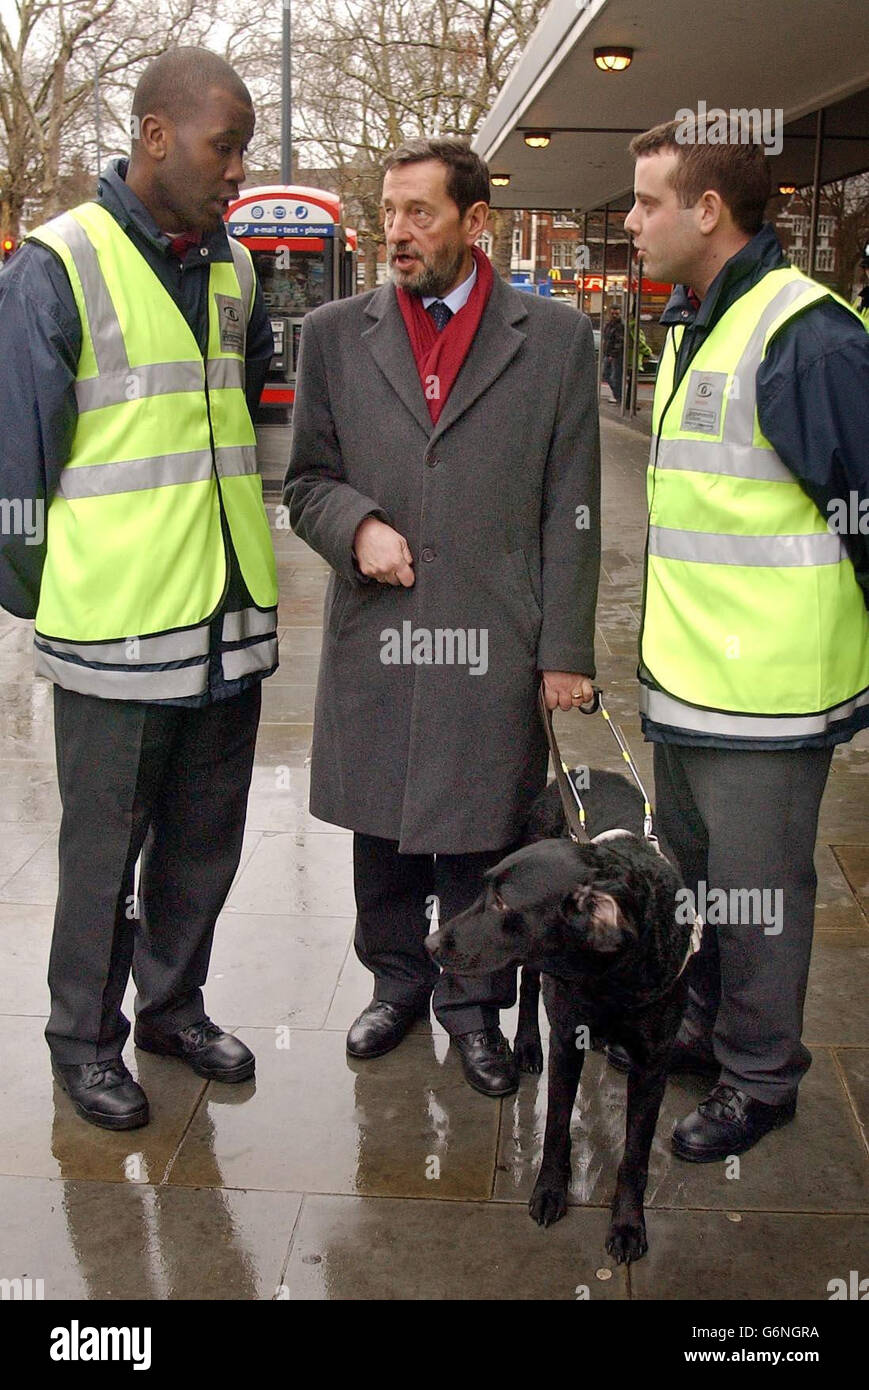 Home Secretary David Blunkett talks with Street Wardens Simeon Whatford (Right) and Sean Mullins (Left) in Shepherd's Bush, west London, as the Government launched new a new law to crack down on anti-social behaviour. Under new powers, police officers will be able to close down crack houses within 48 hours and keep them shut for up to six months and accredited private security guards will be able to stop cyclists for riding on the pavement. Stock Photo